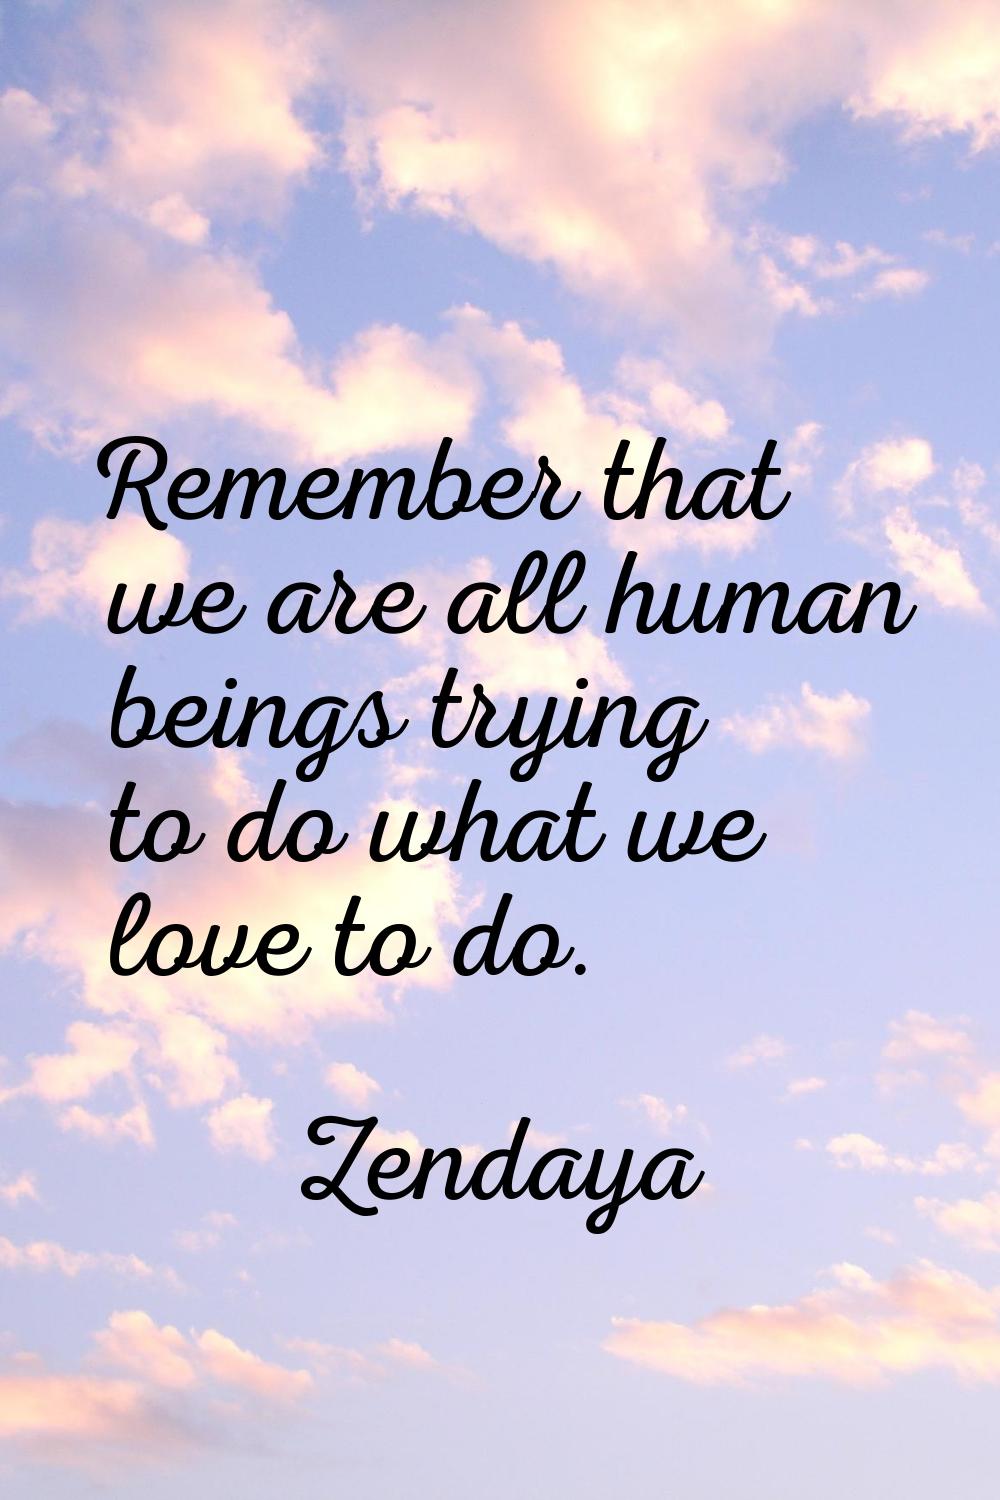 Remember that we are all human beings trying to do what we love to do.